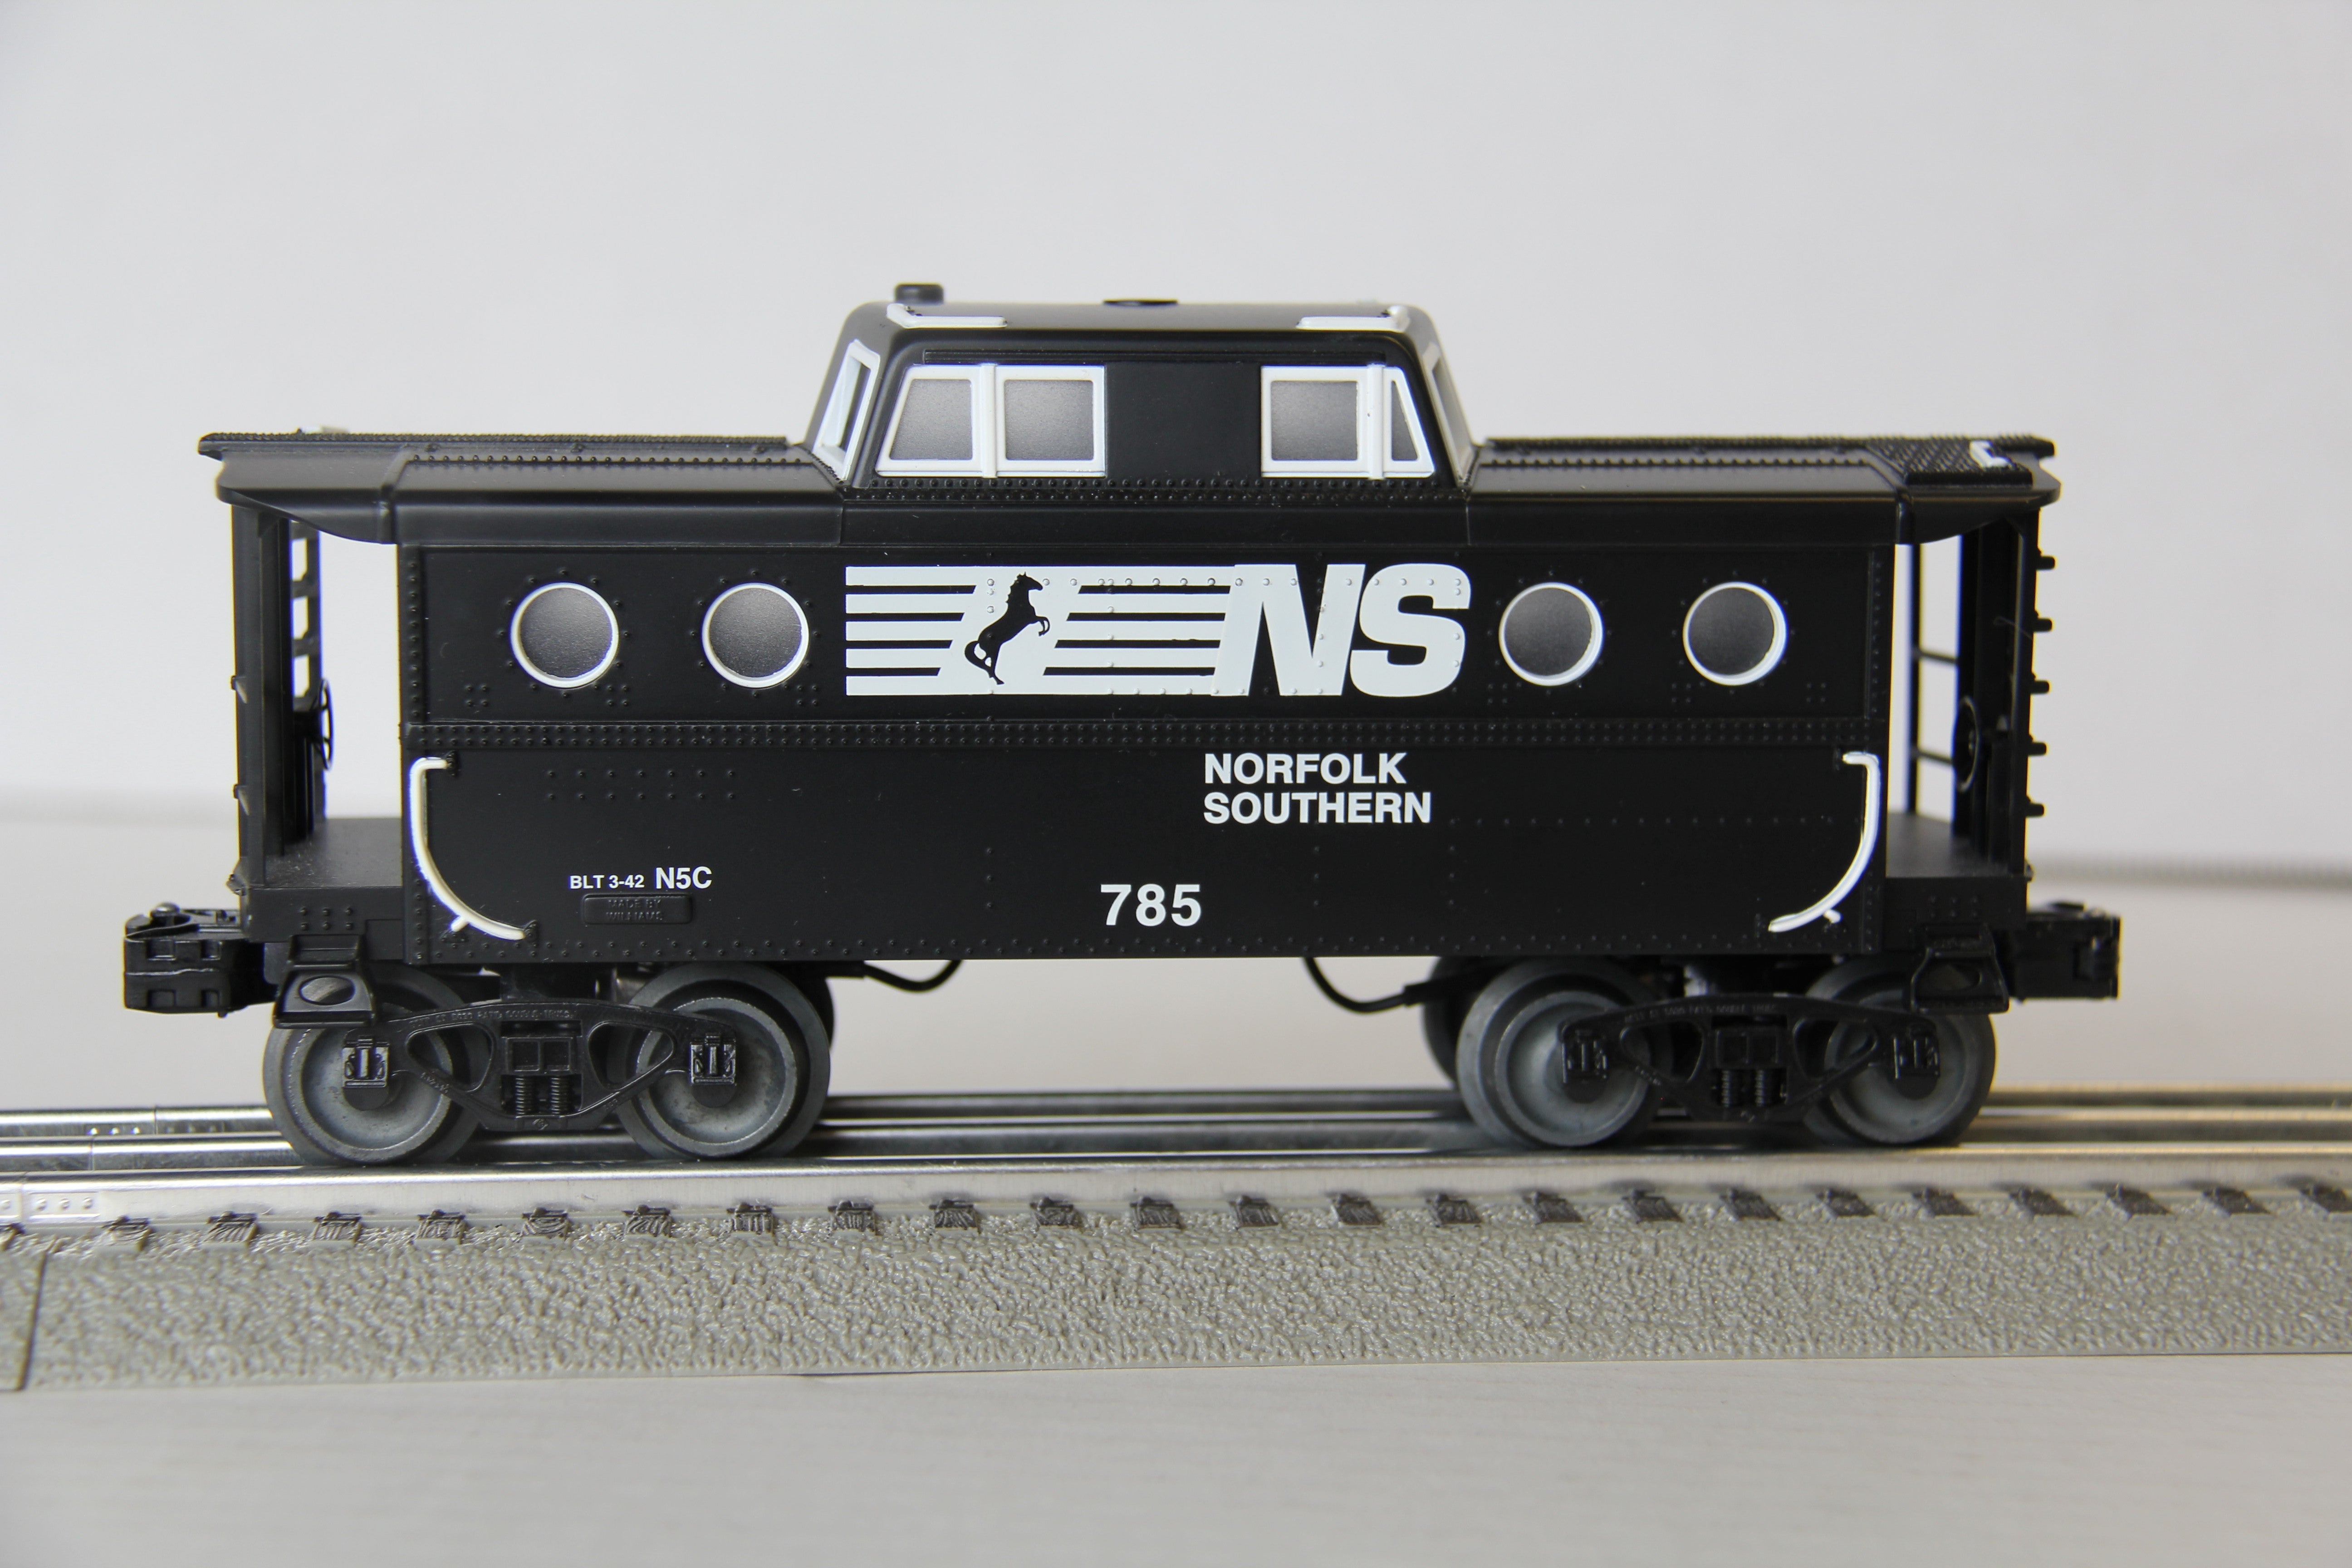 Williams Cab 132 Norfolk Southern Porthole Caboose-Second hand-M4176